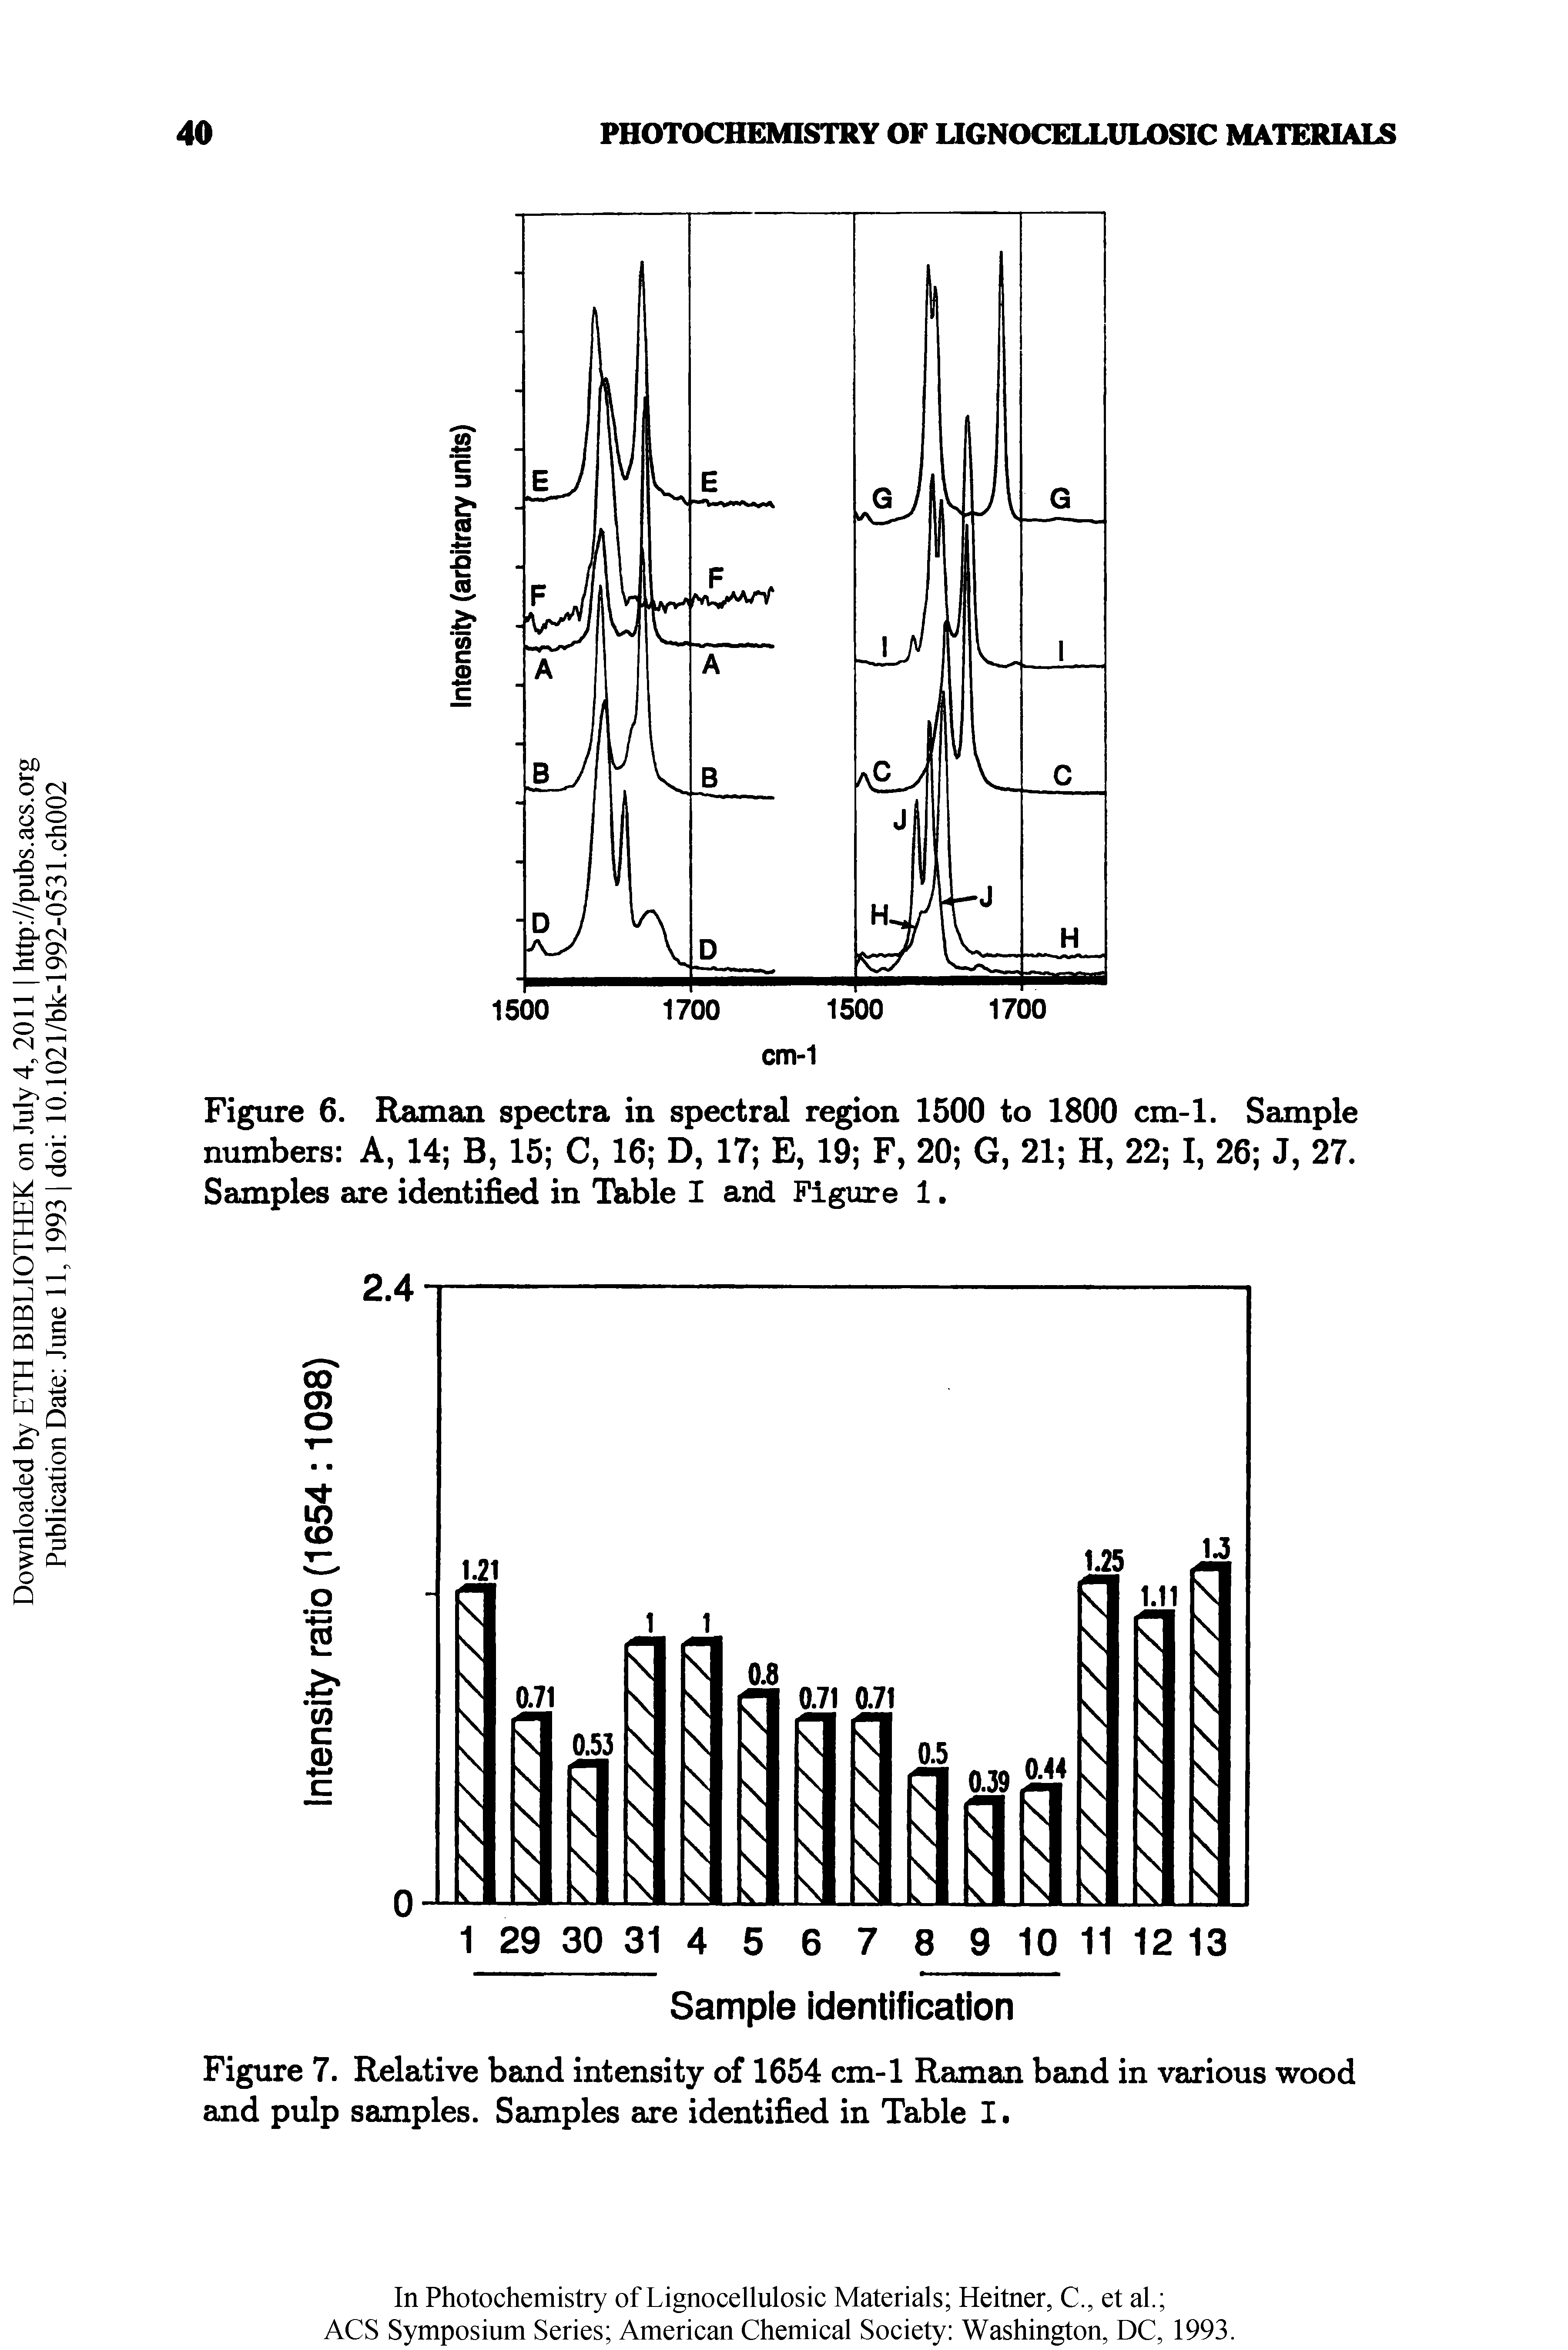 Figure 7. Relative band intensity of 1654 cm-1 Raman band in various wood and pulp samples. Samples are identified in Table I.